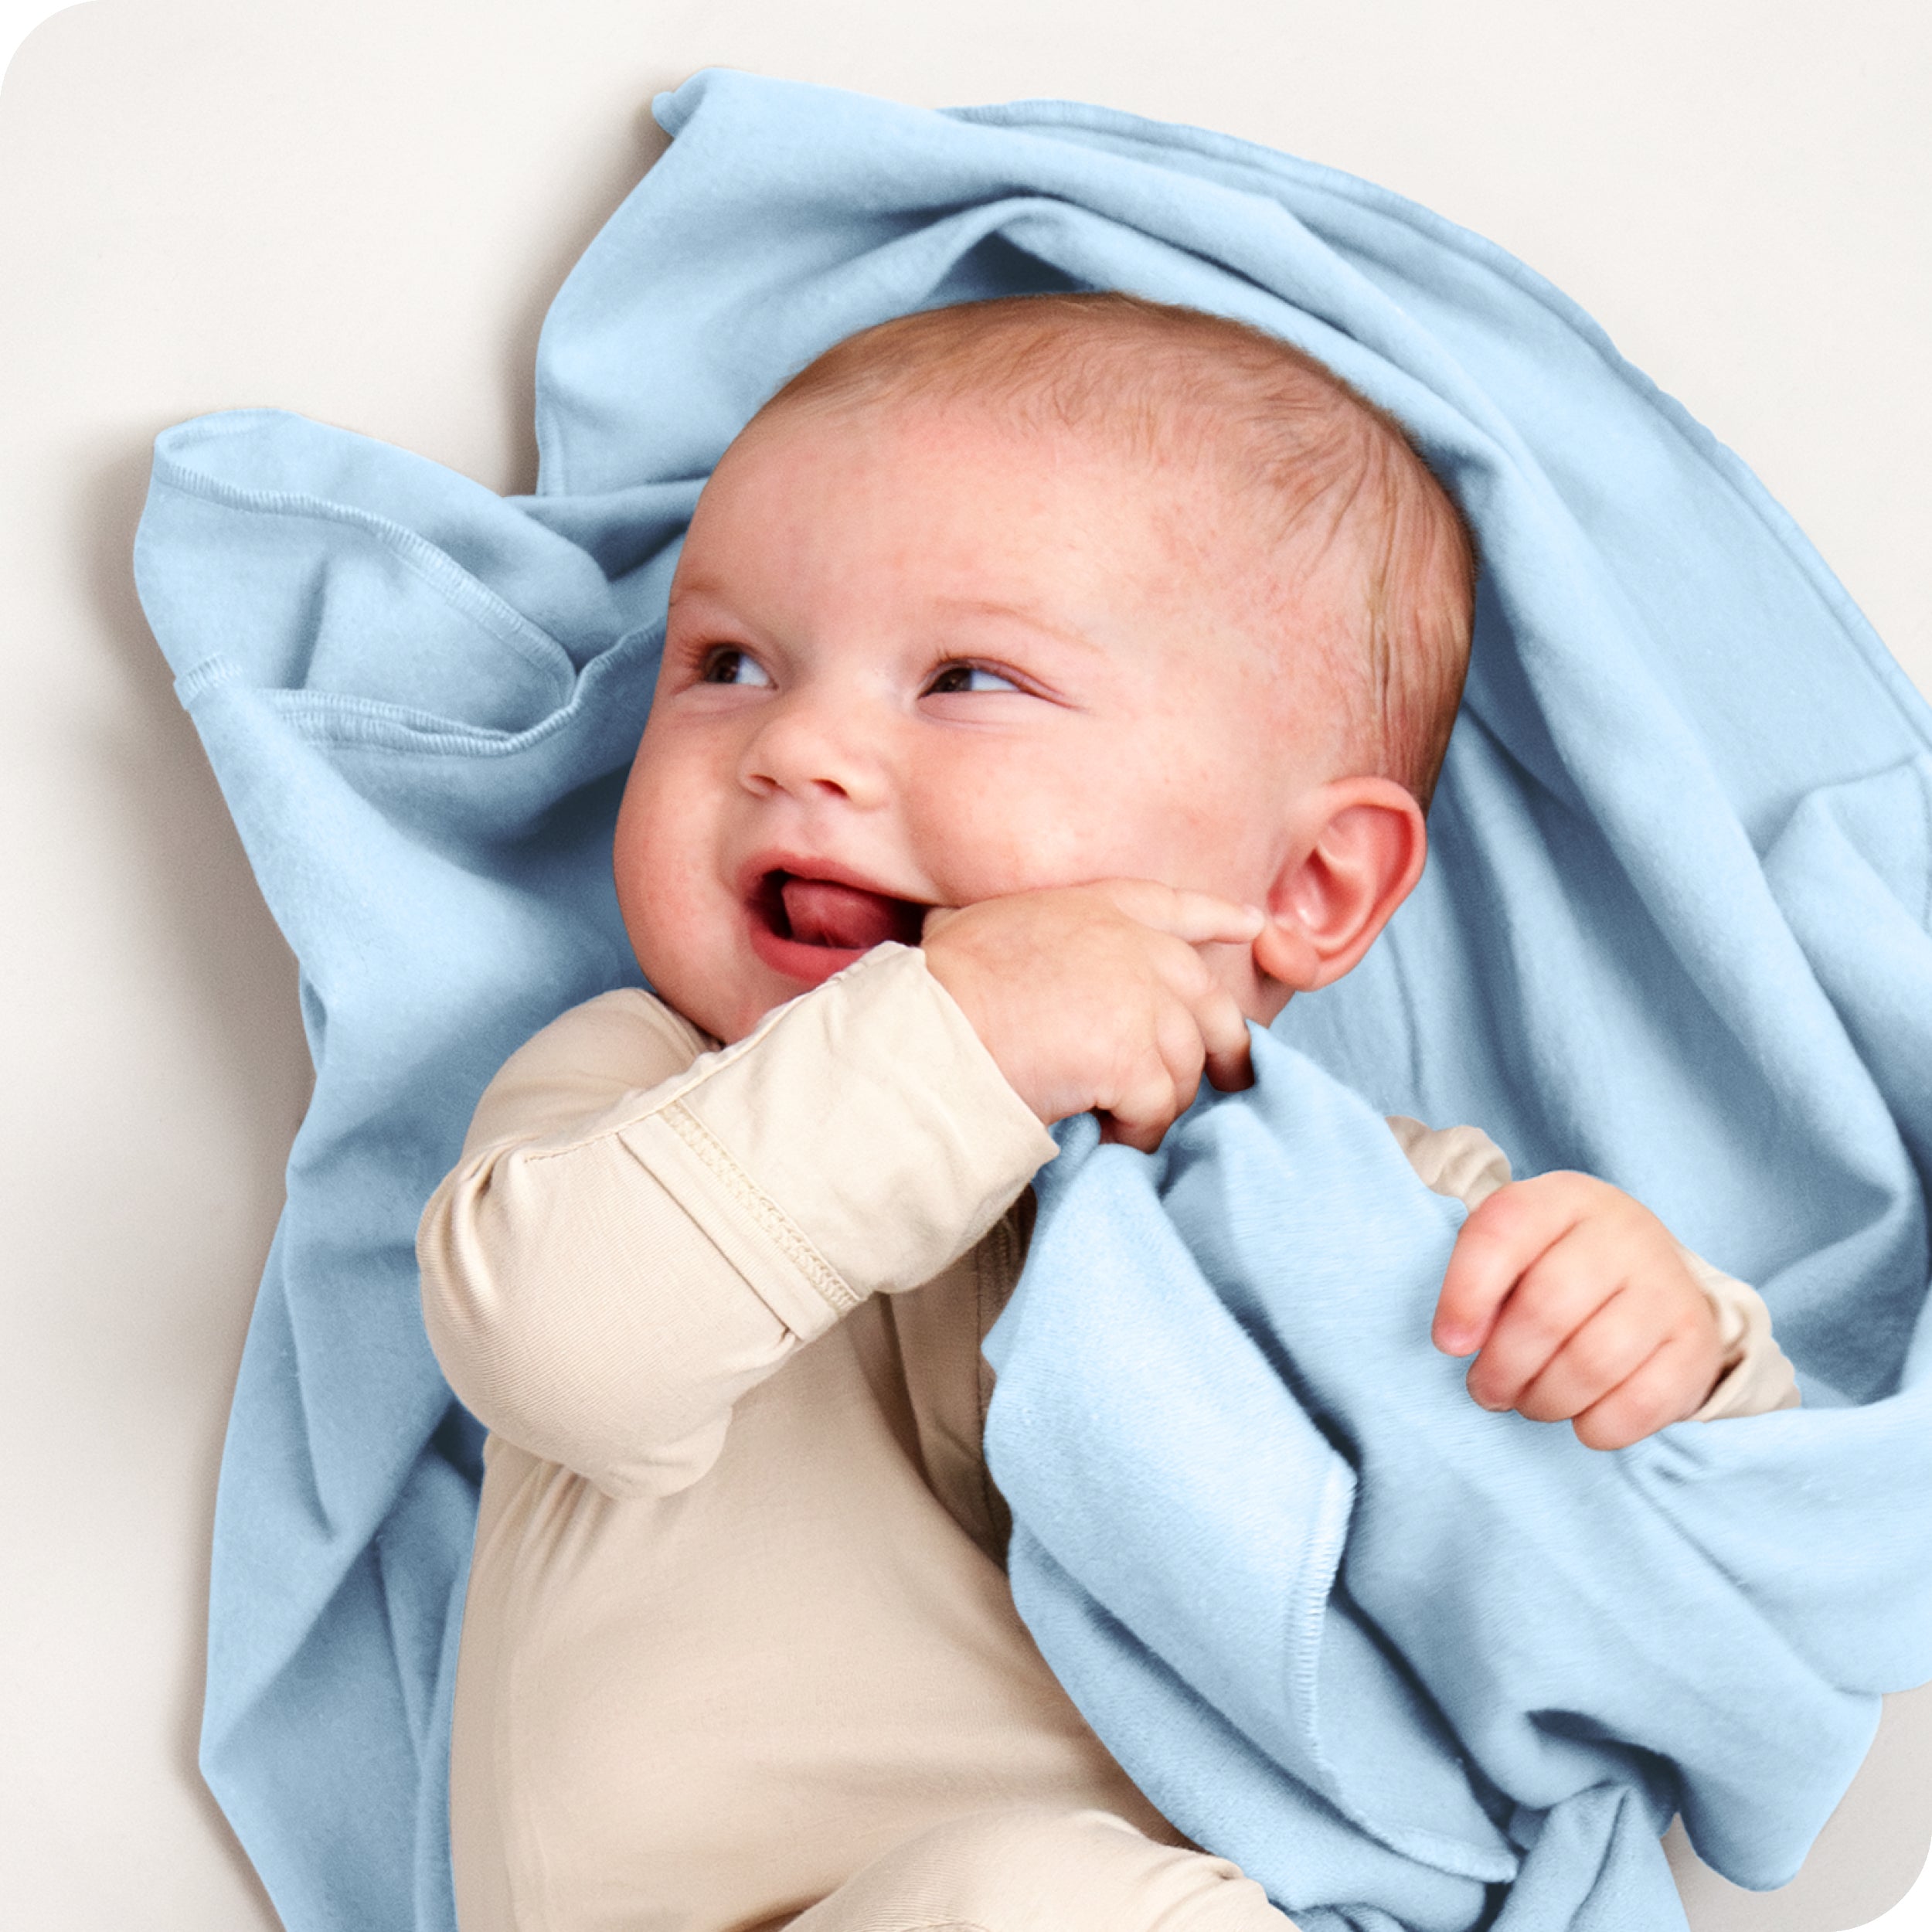 A baby lying on a receiving blanket. She has her thumb in her mouth.